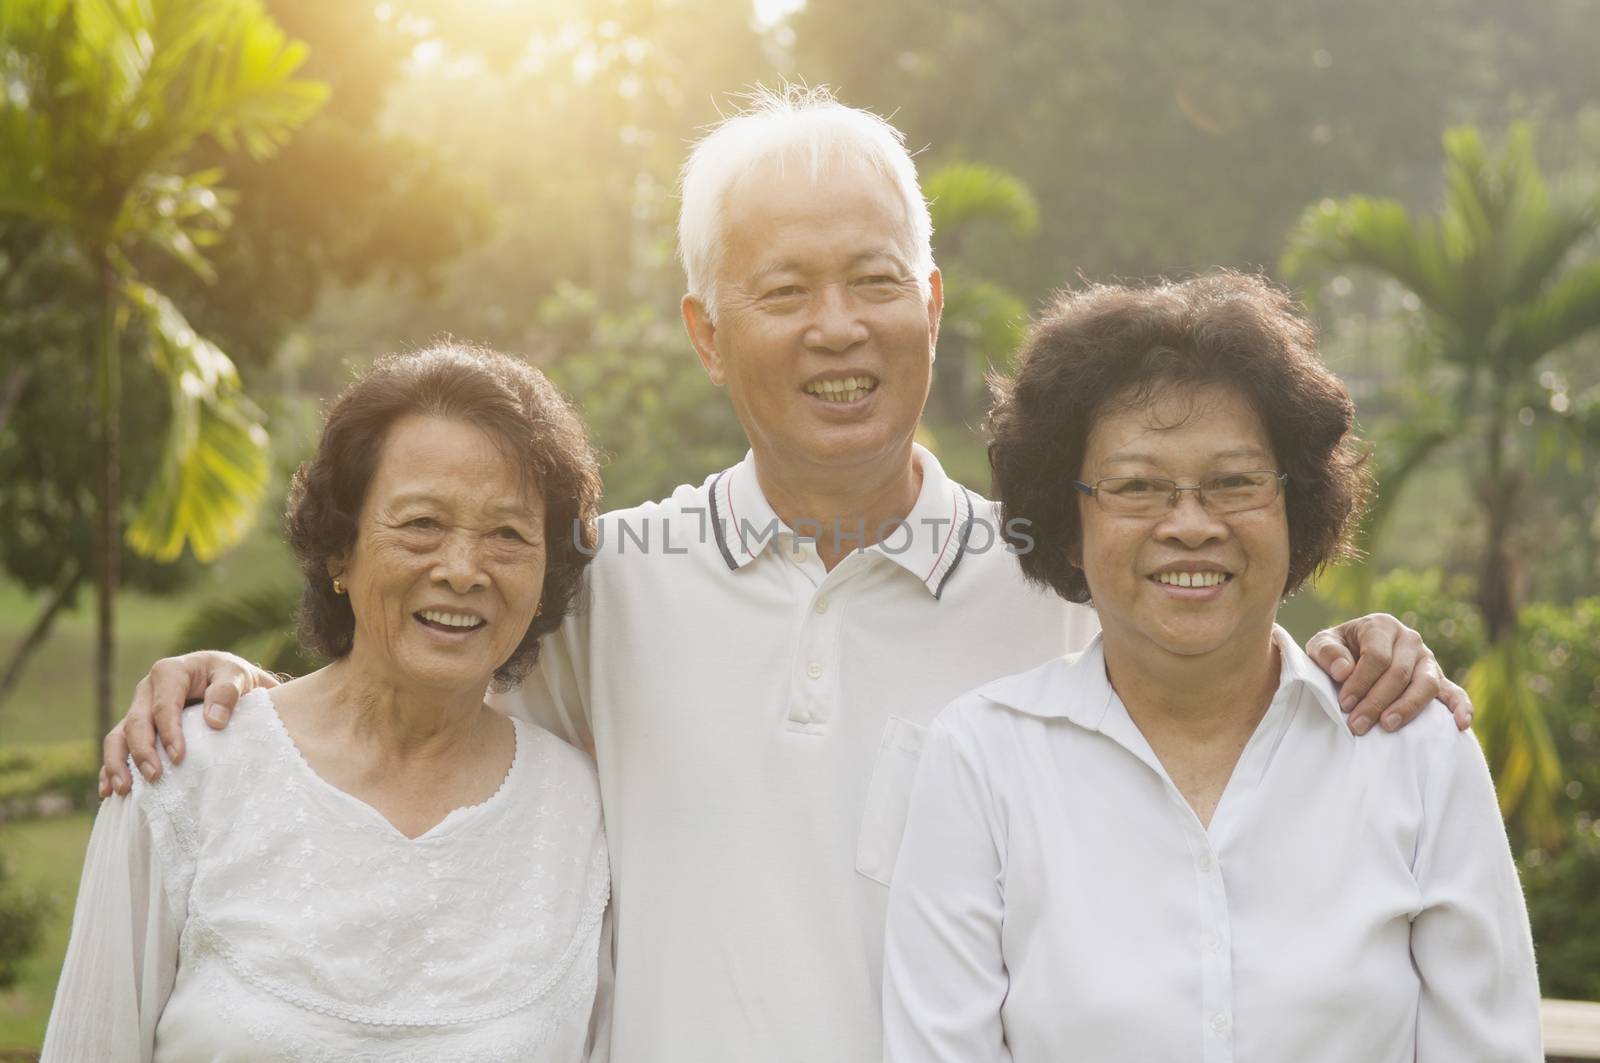 Group of healthy happy Asian seniors celebrating friendship at outdoor nature park, in morning beautiful sunlight at background.